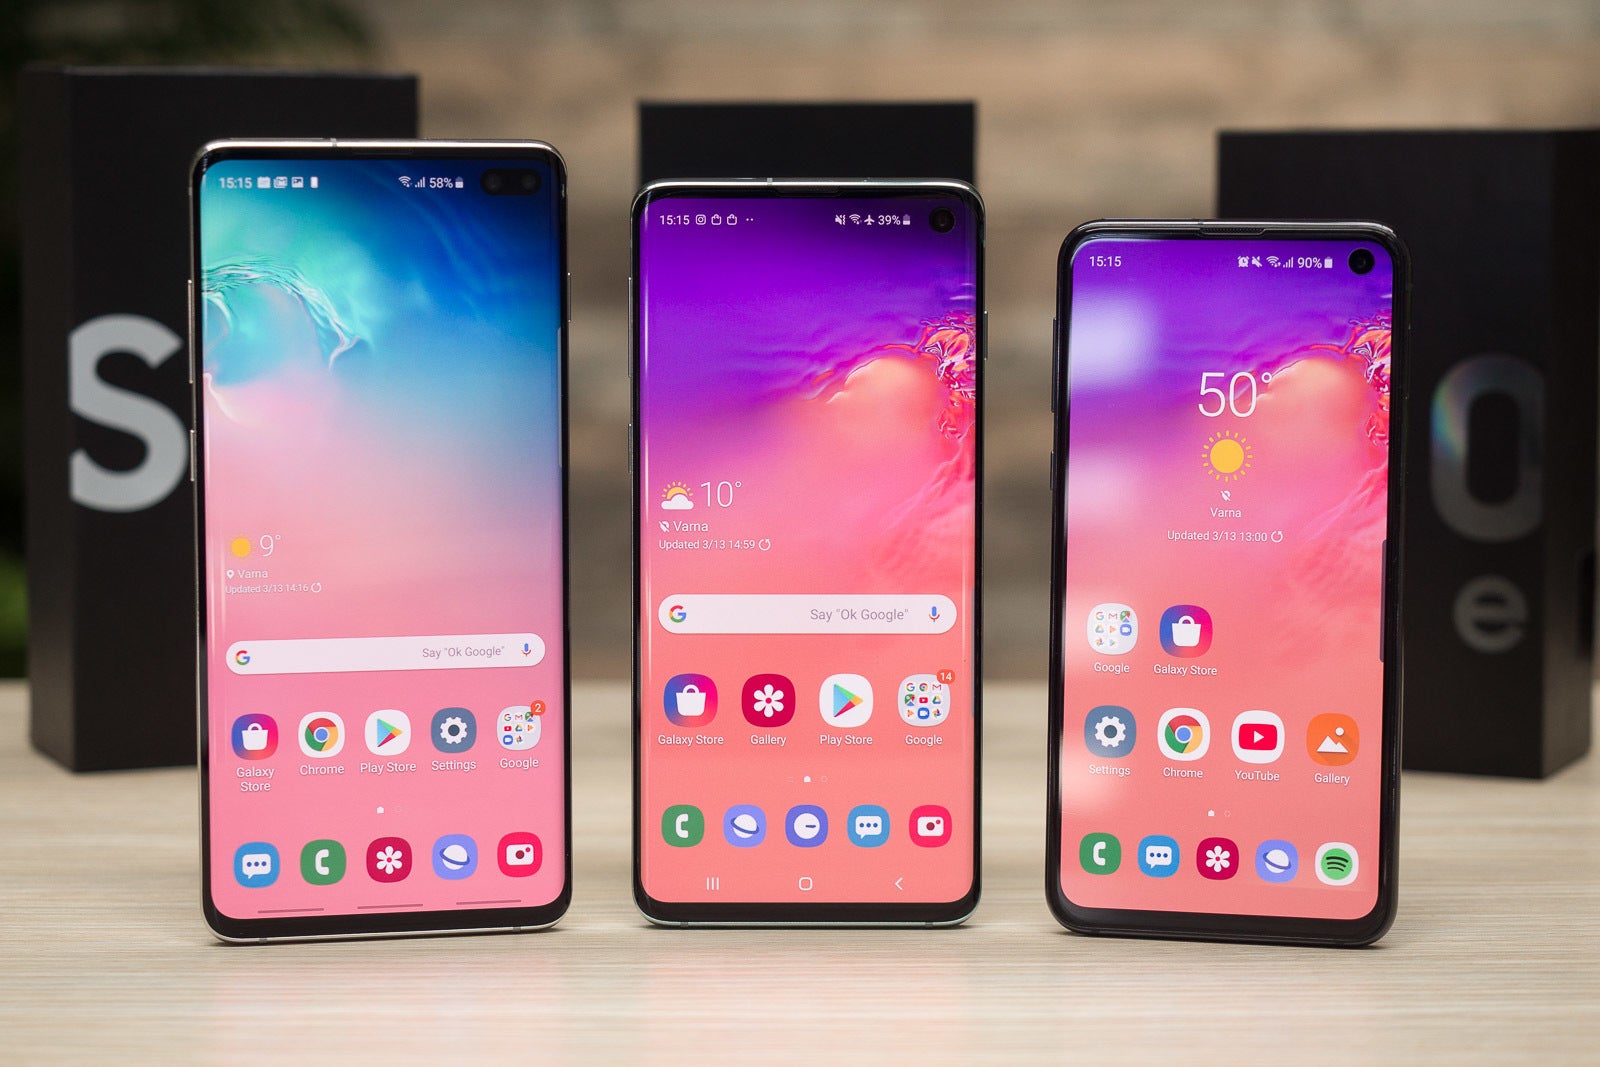 The Galaxy A90 could offer similar specs to the Galaxy S10 series, but for much less - Samsung seemingly confirms Galaxy A90's 'notchless Infinity screen'